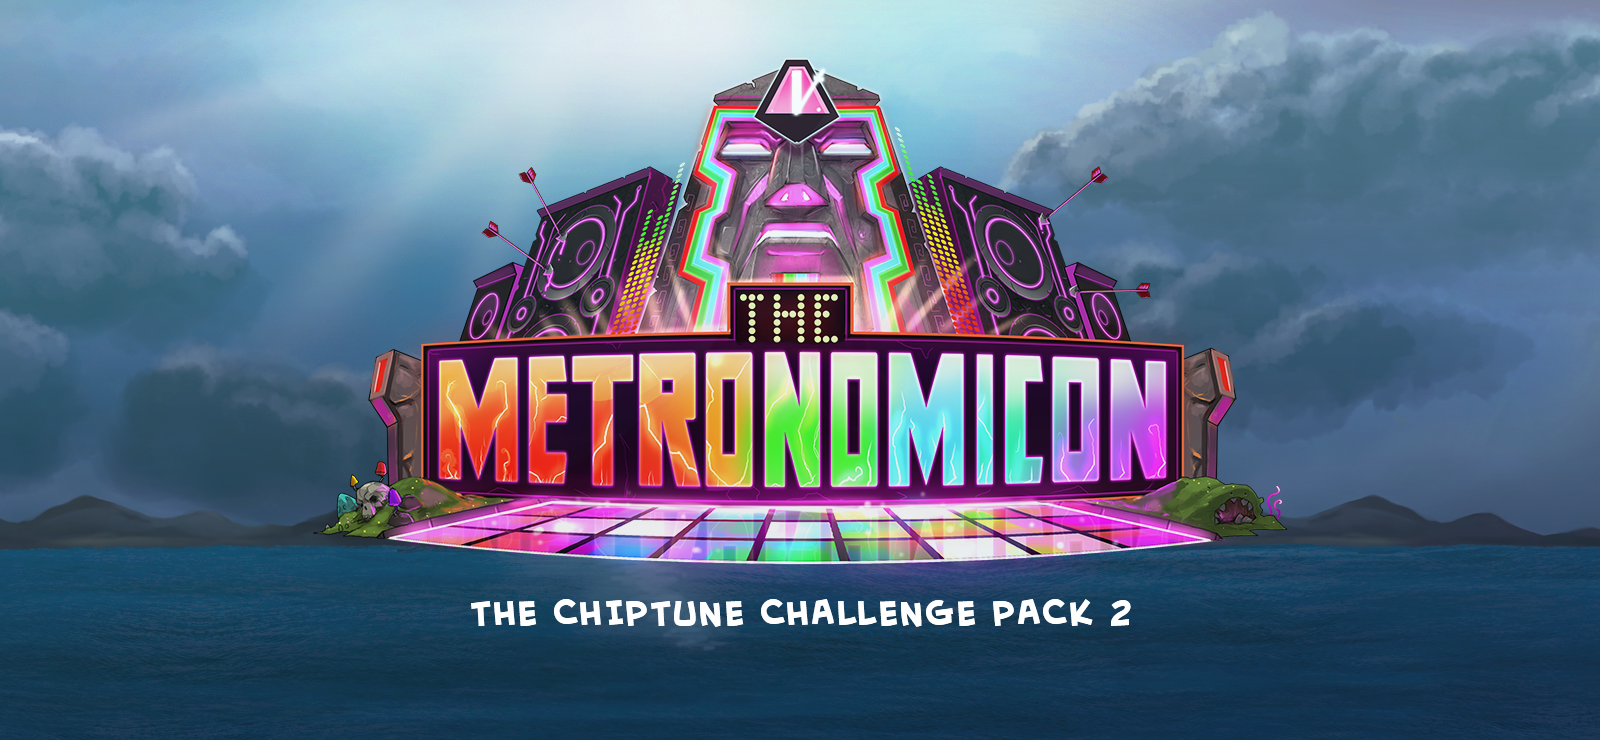 The Metronomicon - Chiptune Pack 2